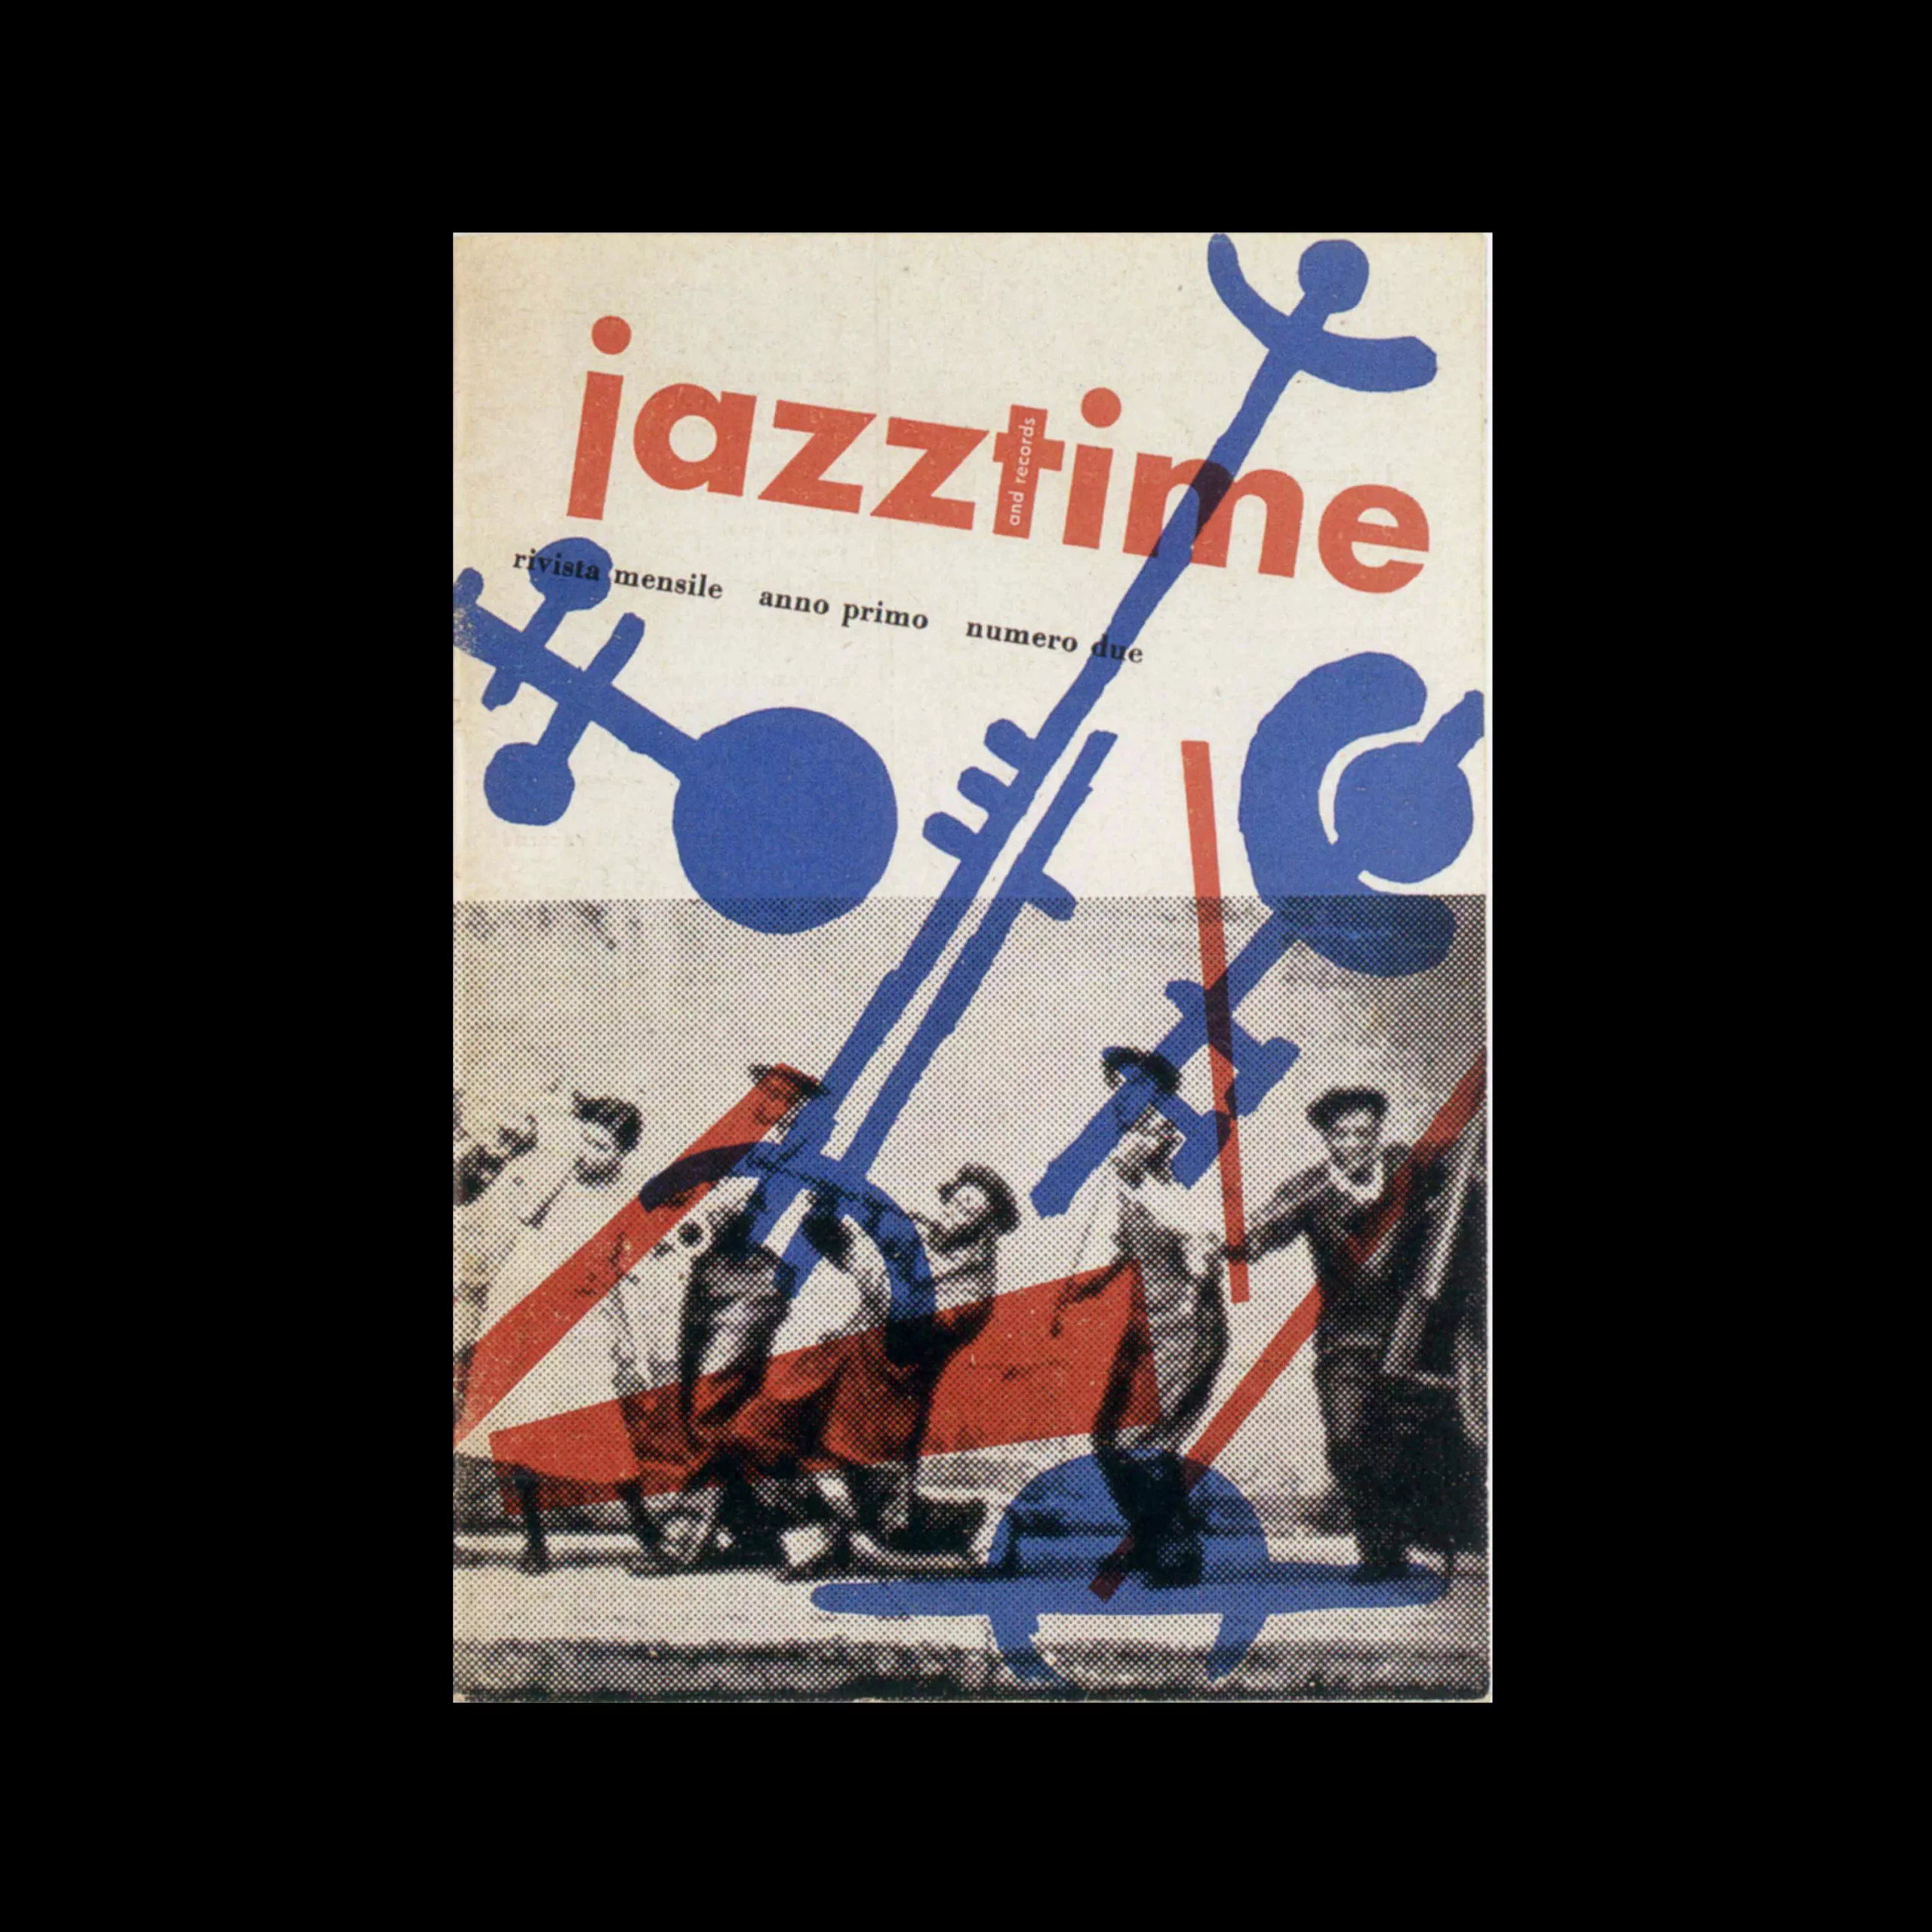 Jazztime magazines, 1952 designed from Max Huber scanned from Idea 335, 2009-7 – Max Huber Special.